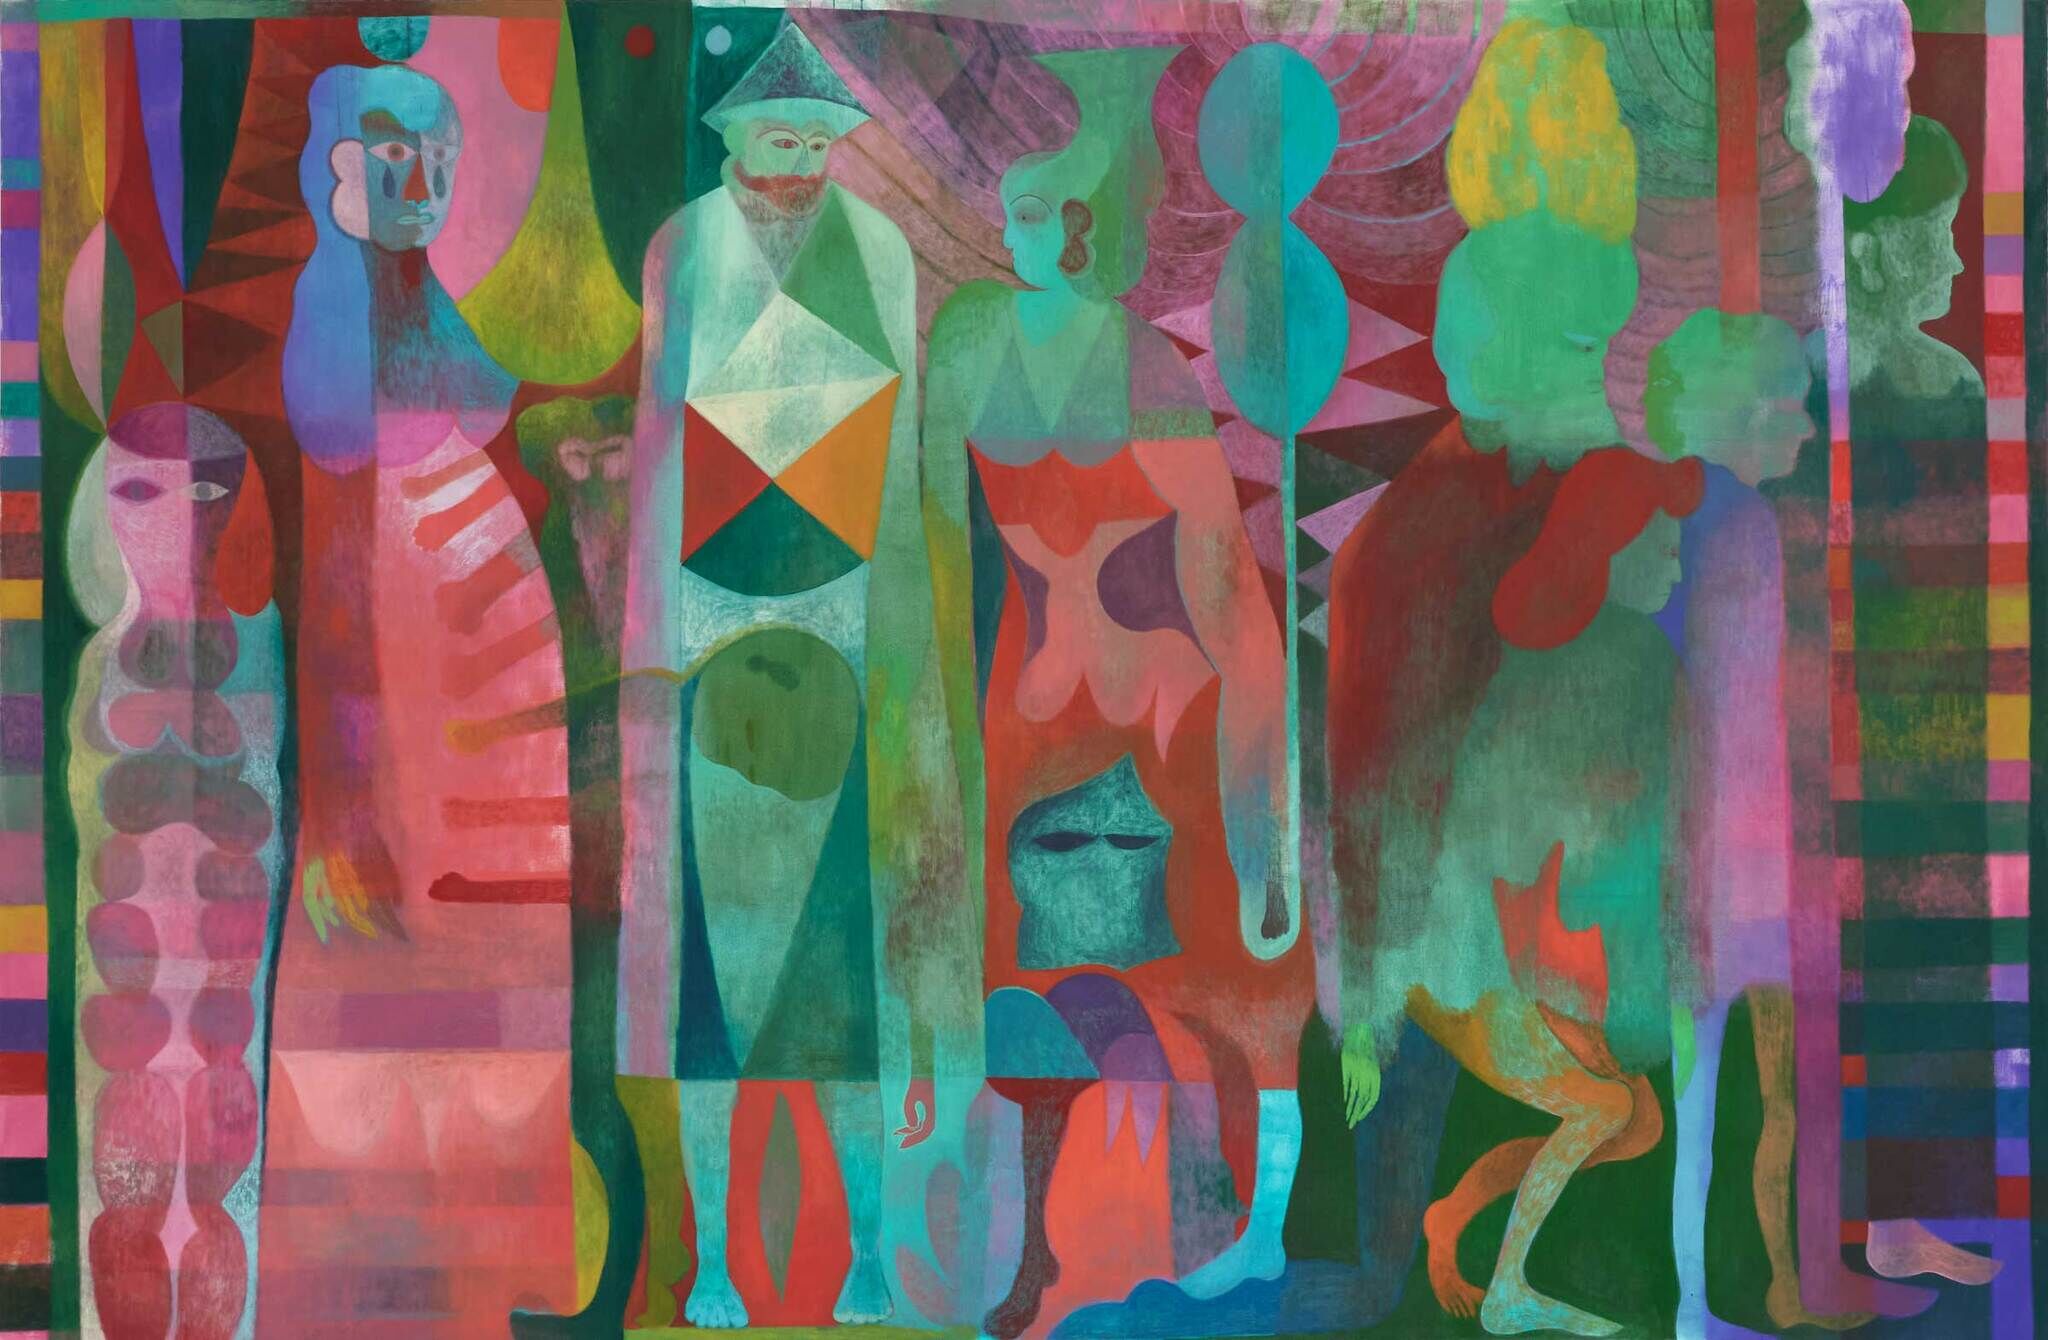 Colorful abstract painting with stylized human figures and geometric shapes.